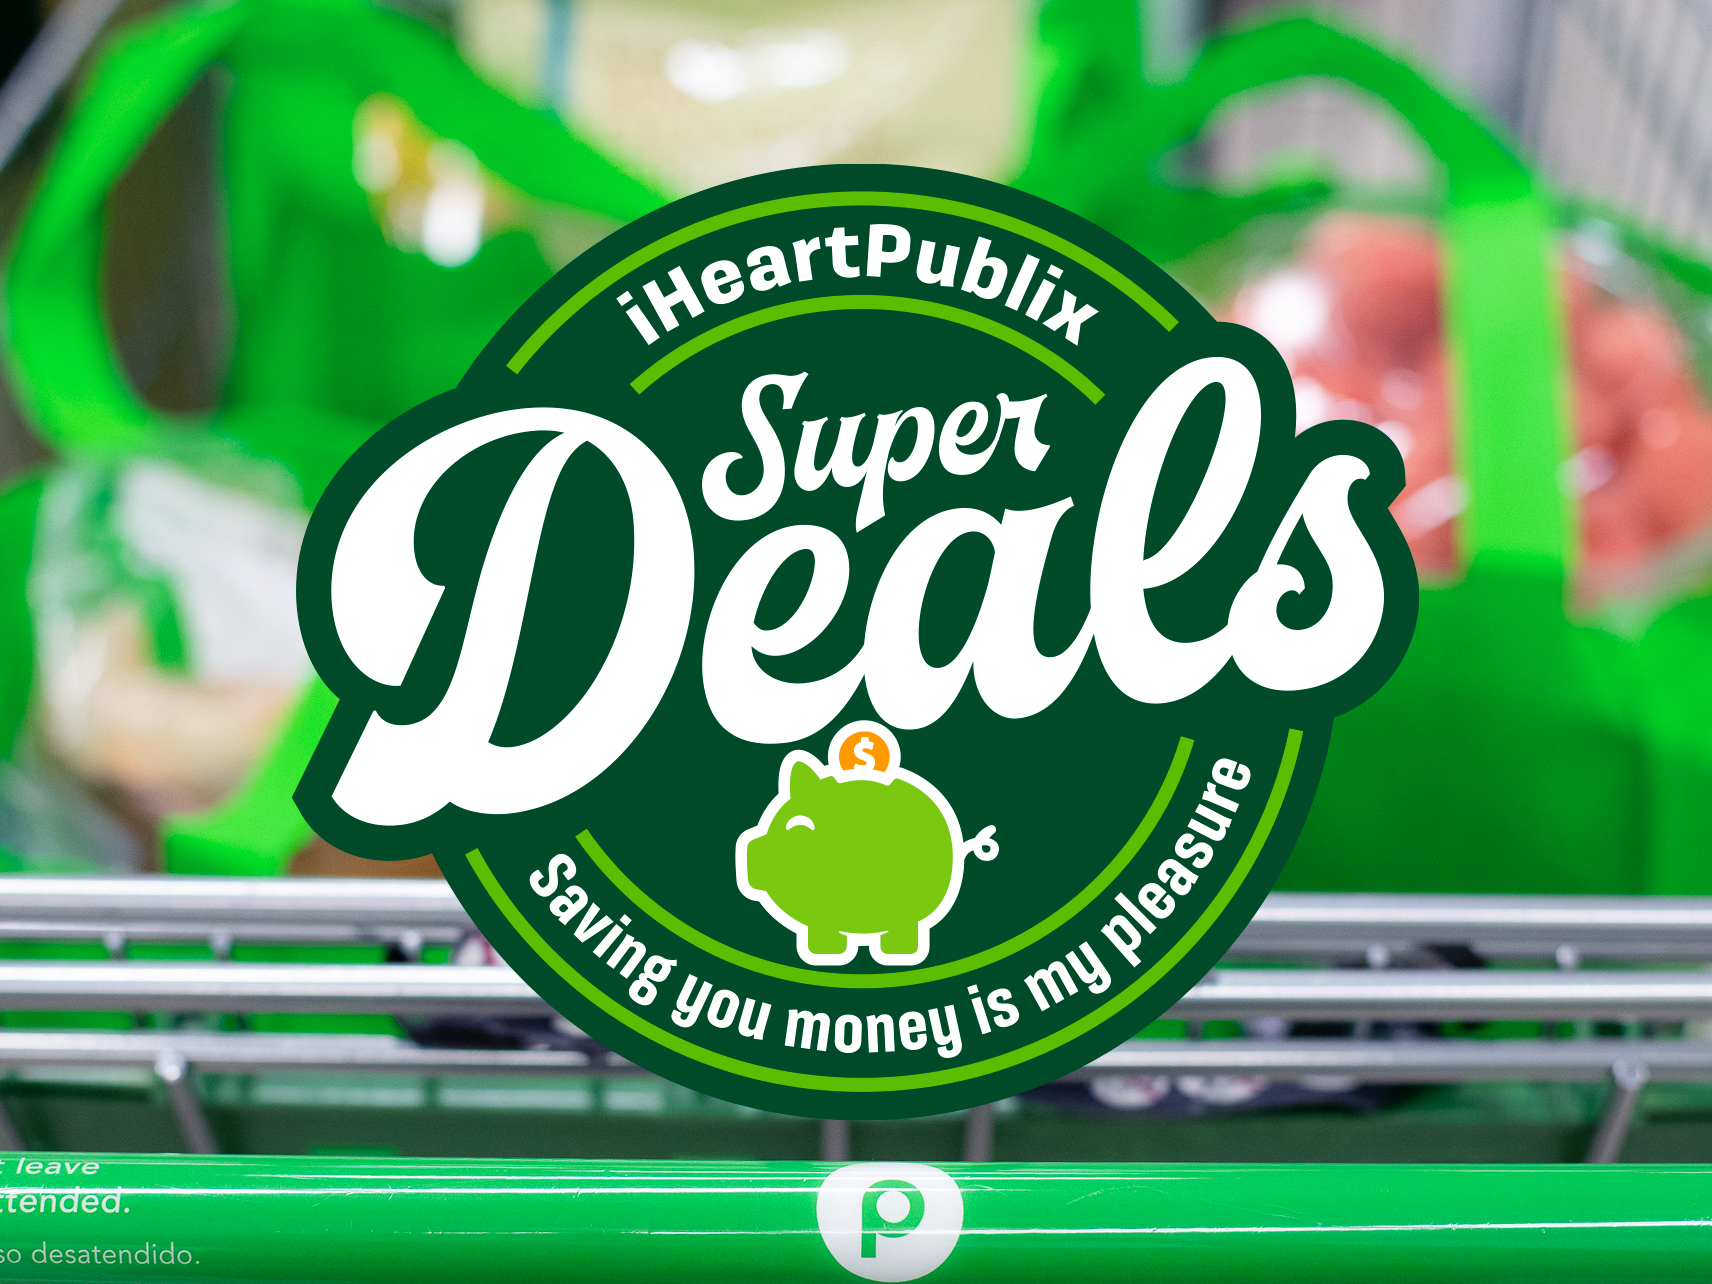 Publix Super Deals Week Of 10/27 to 11/2 (10/26 to 11/1 For Some)